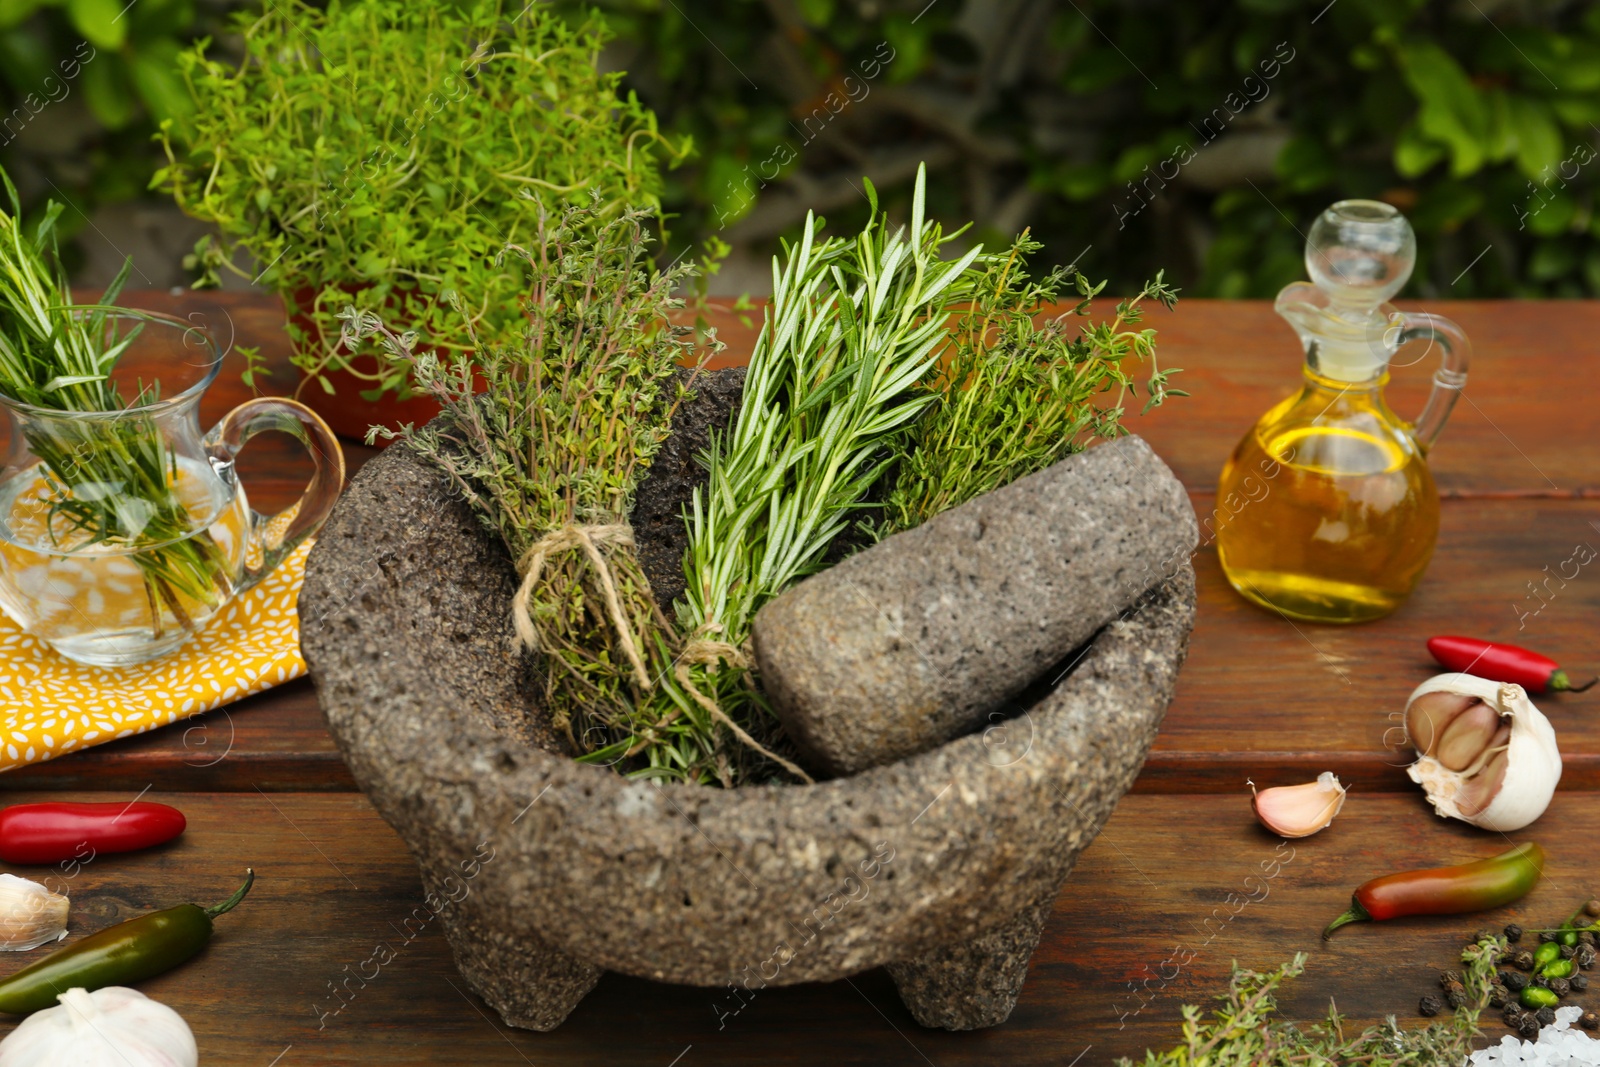 Photo of Mortar, different herbs, vegetables and oil on wooden table outdoors